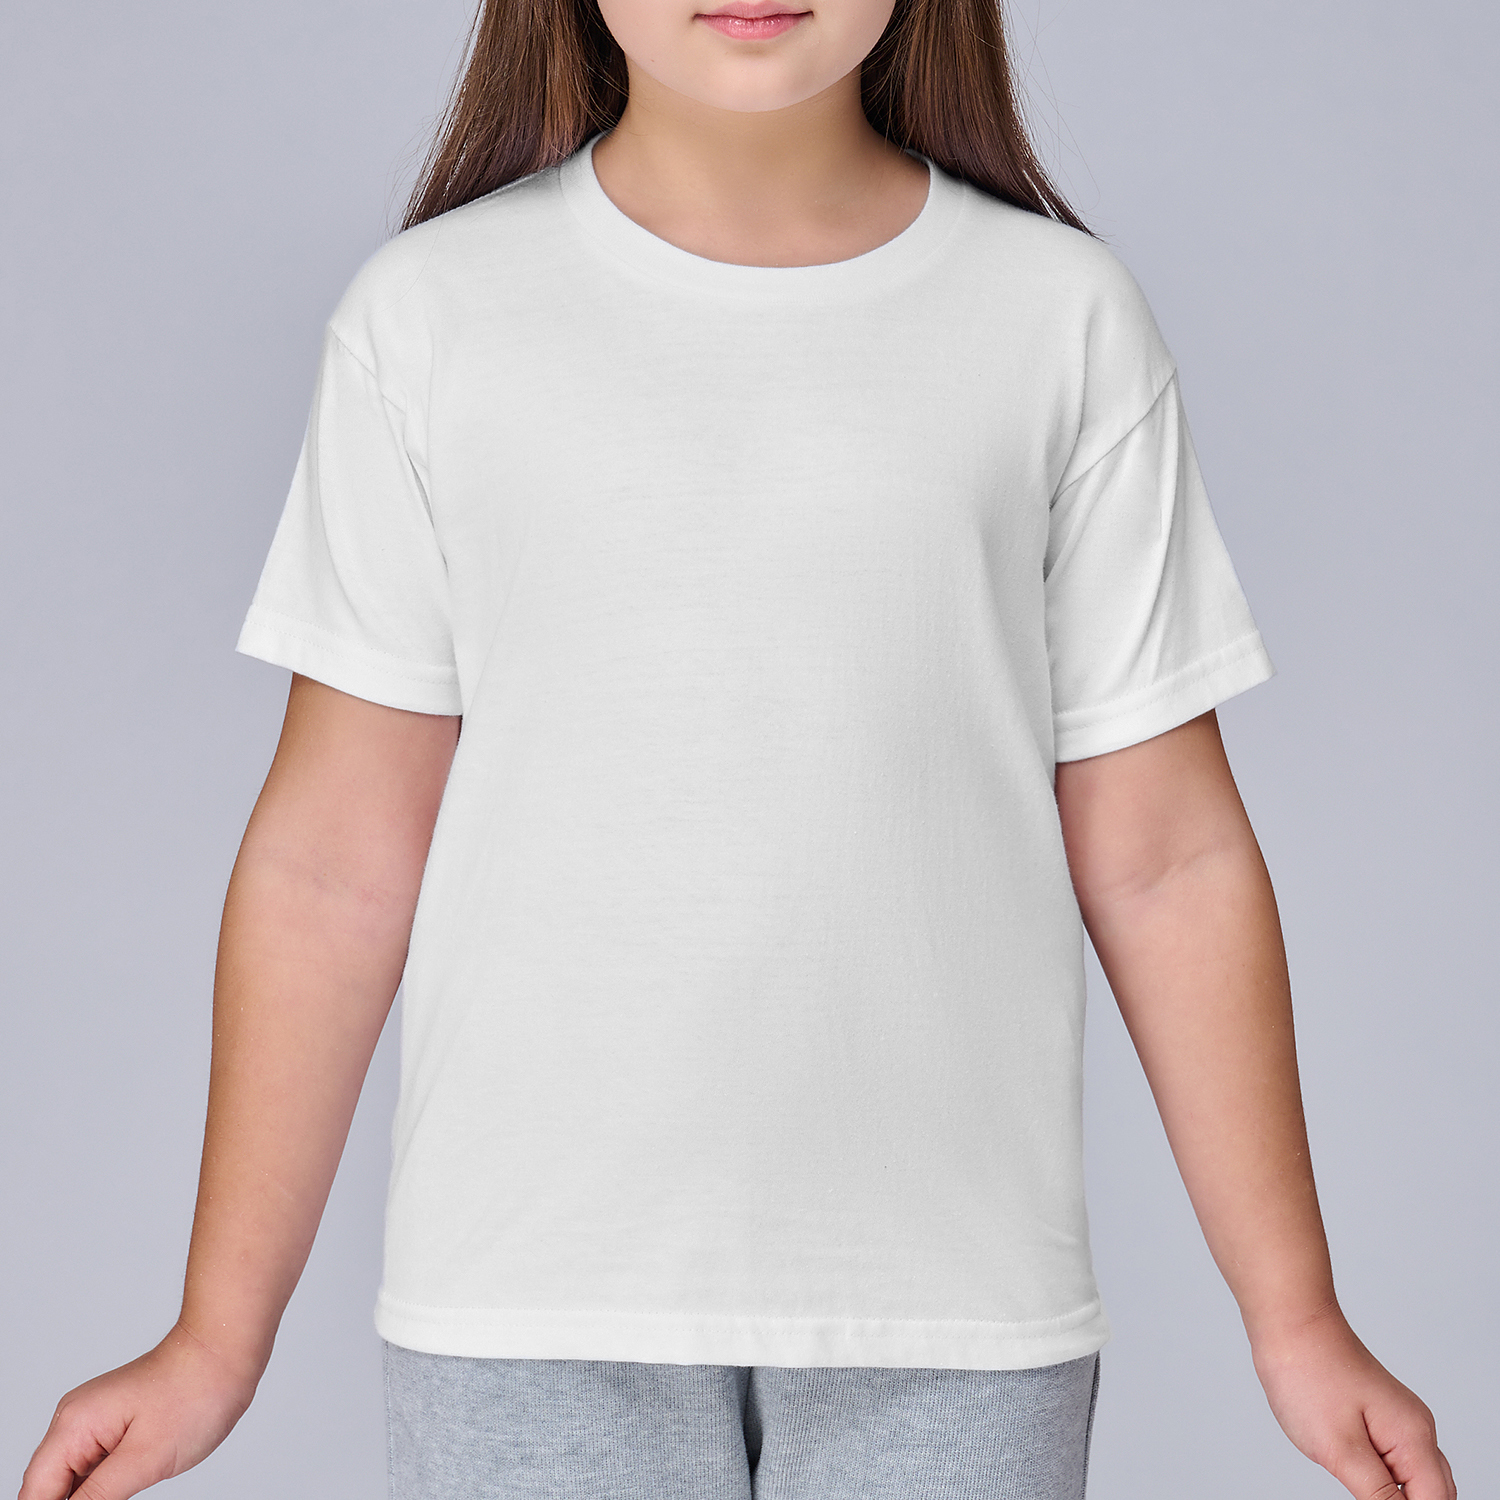 Shop Soft Cotton T-Shirts for Kids | High-Quality Cotton Tees-7